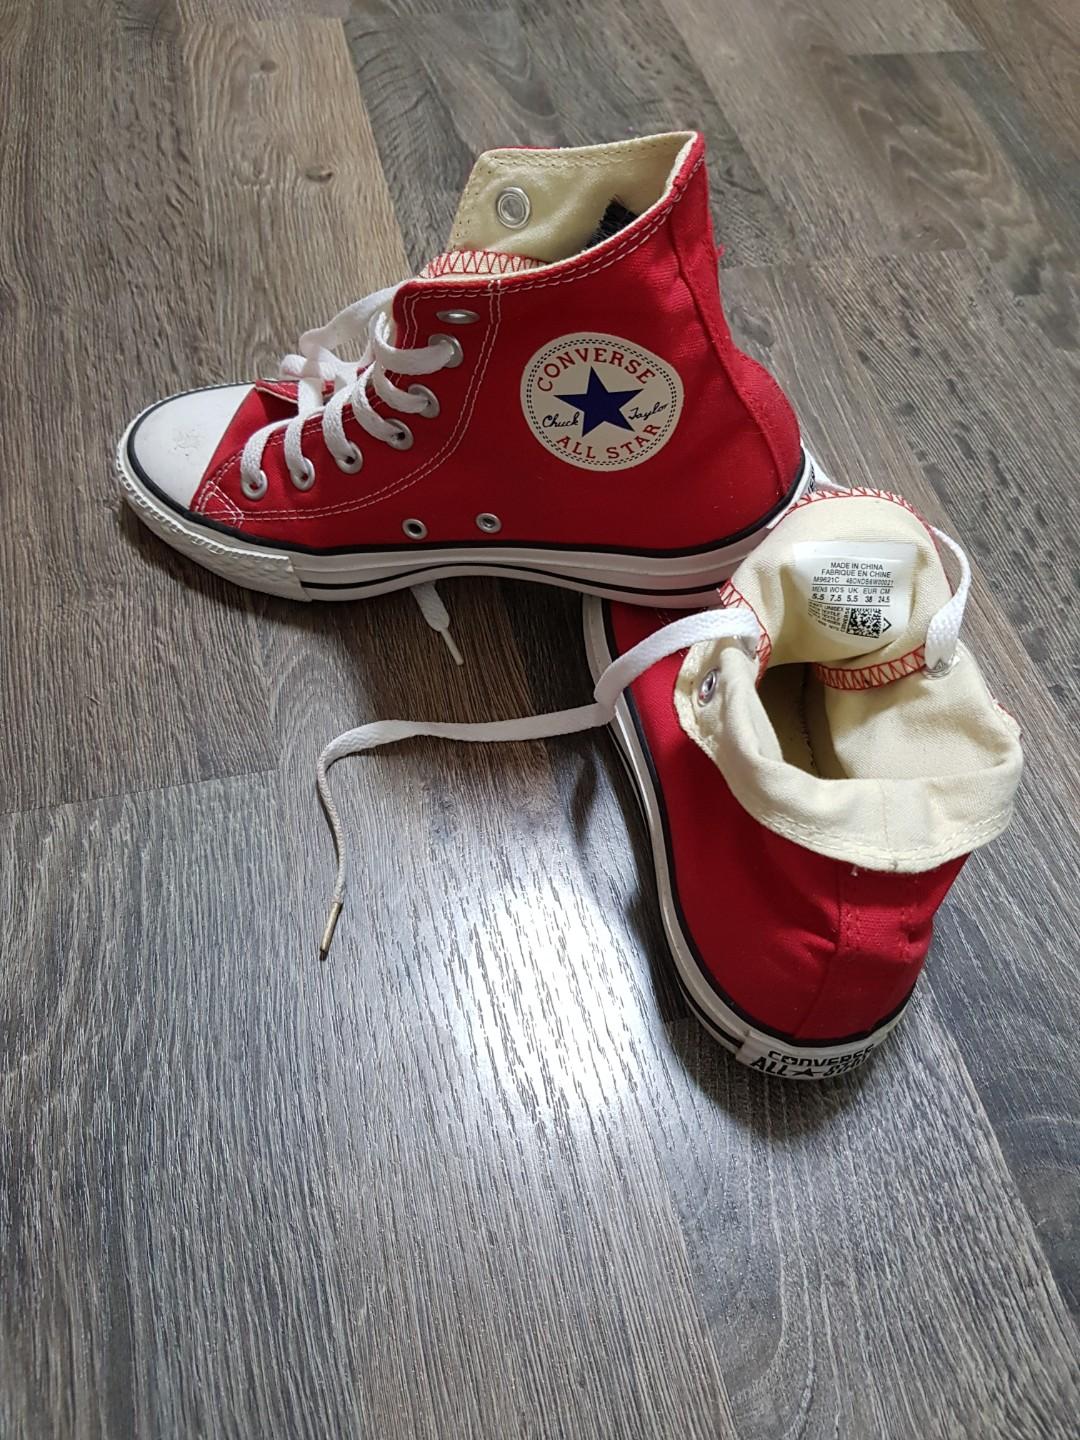 converse shoes old school